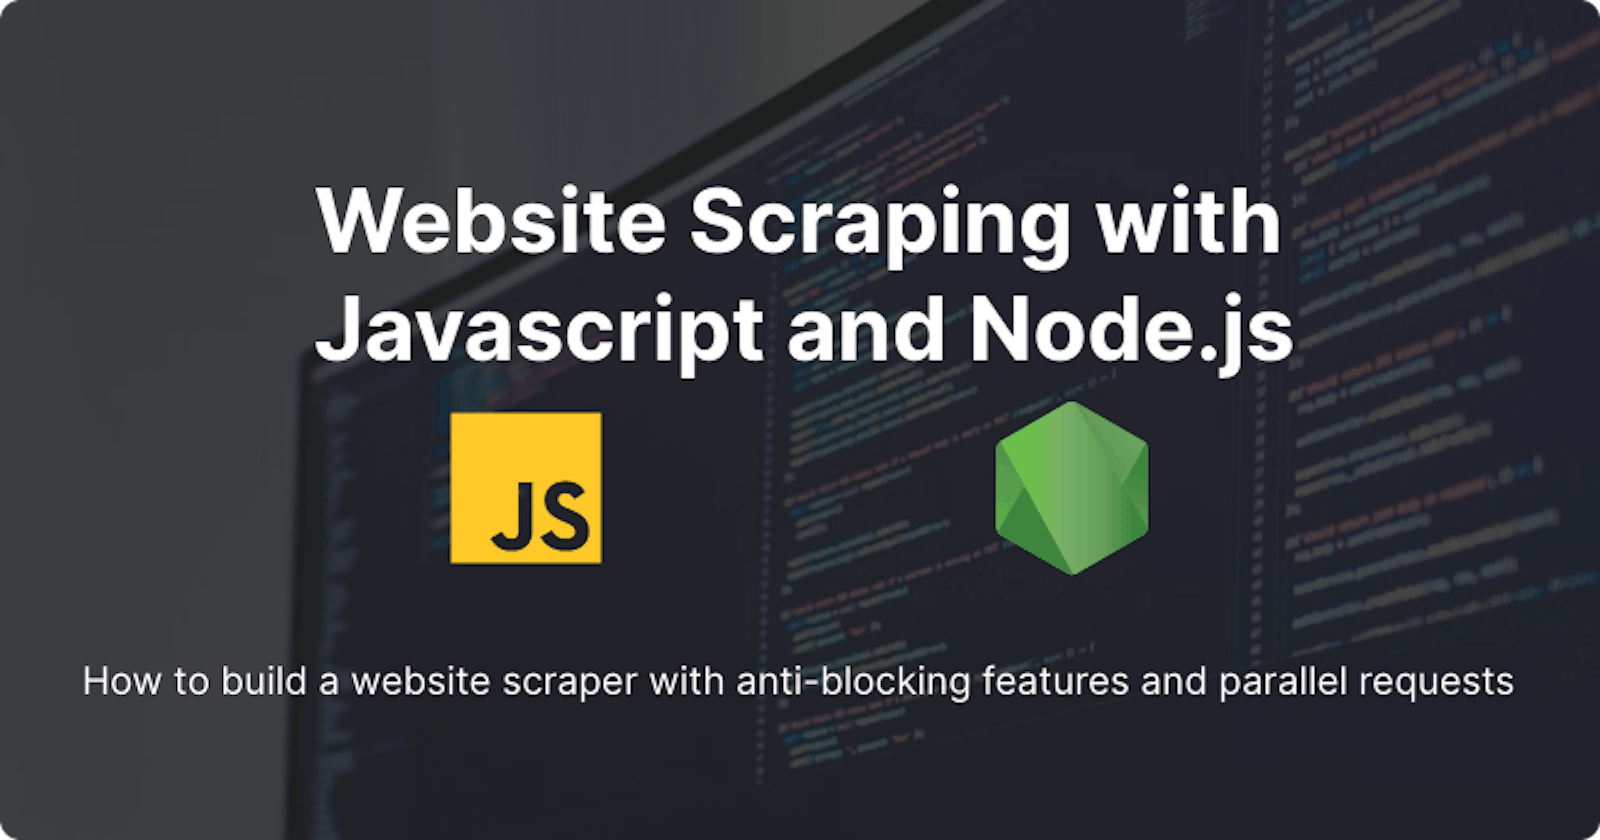 Web Scraping with Javascript and Node.js